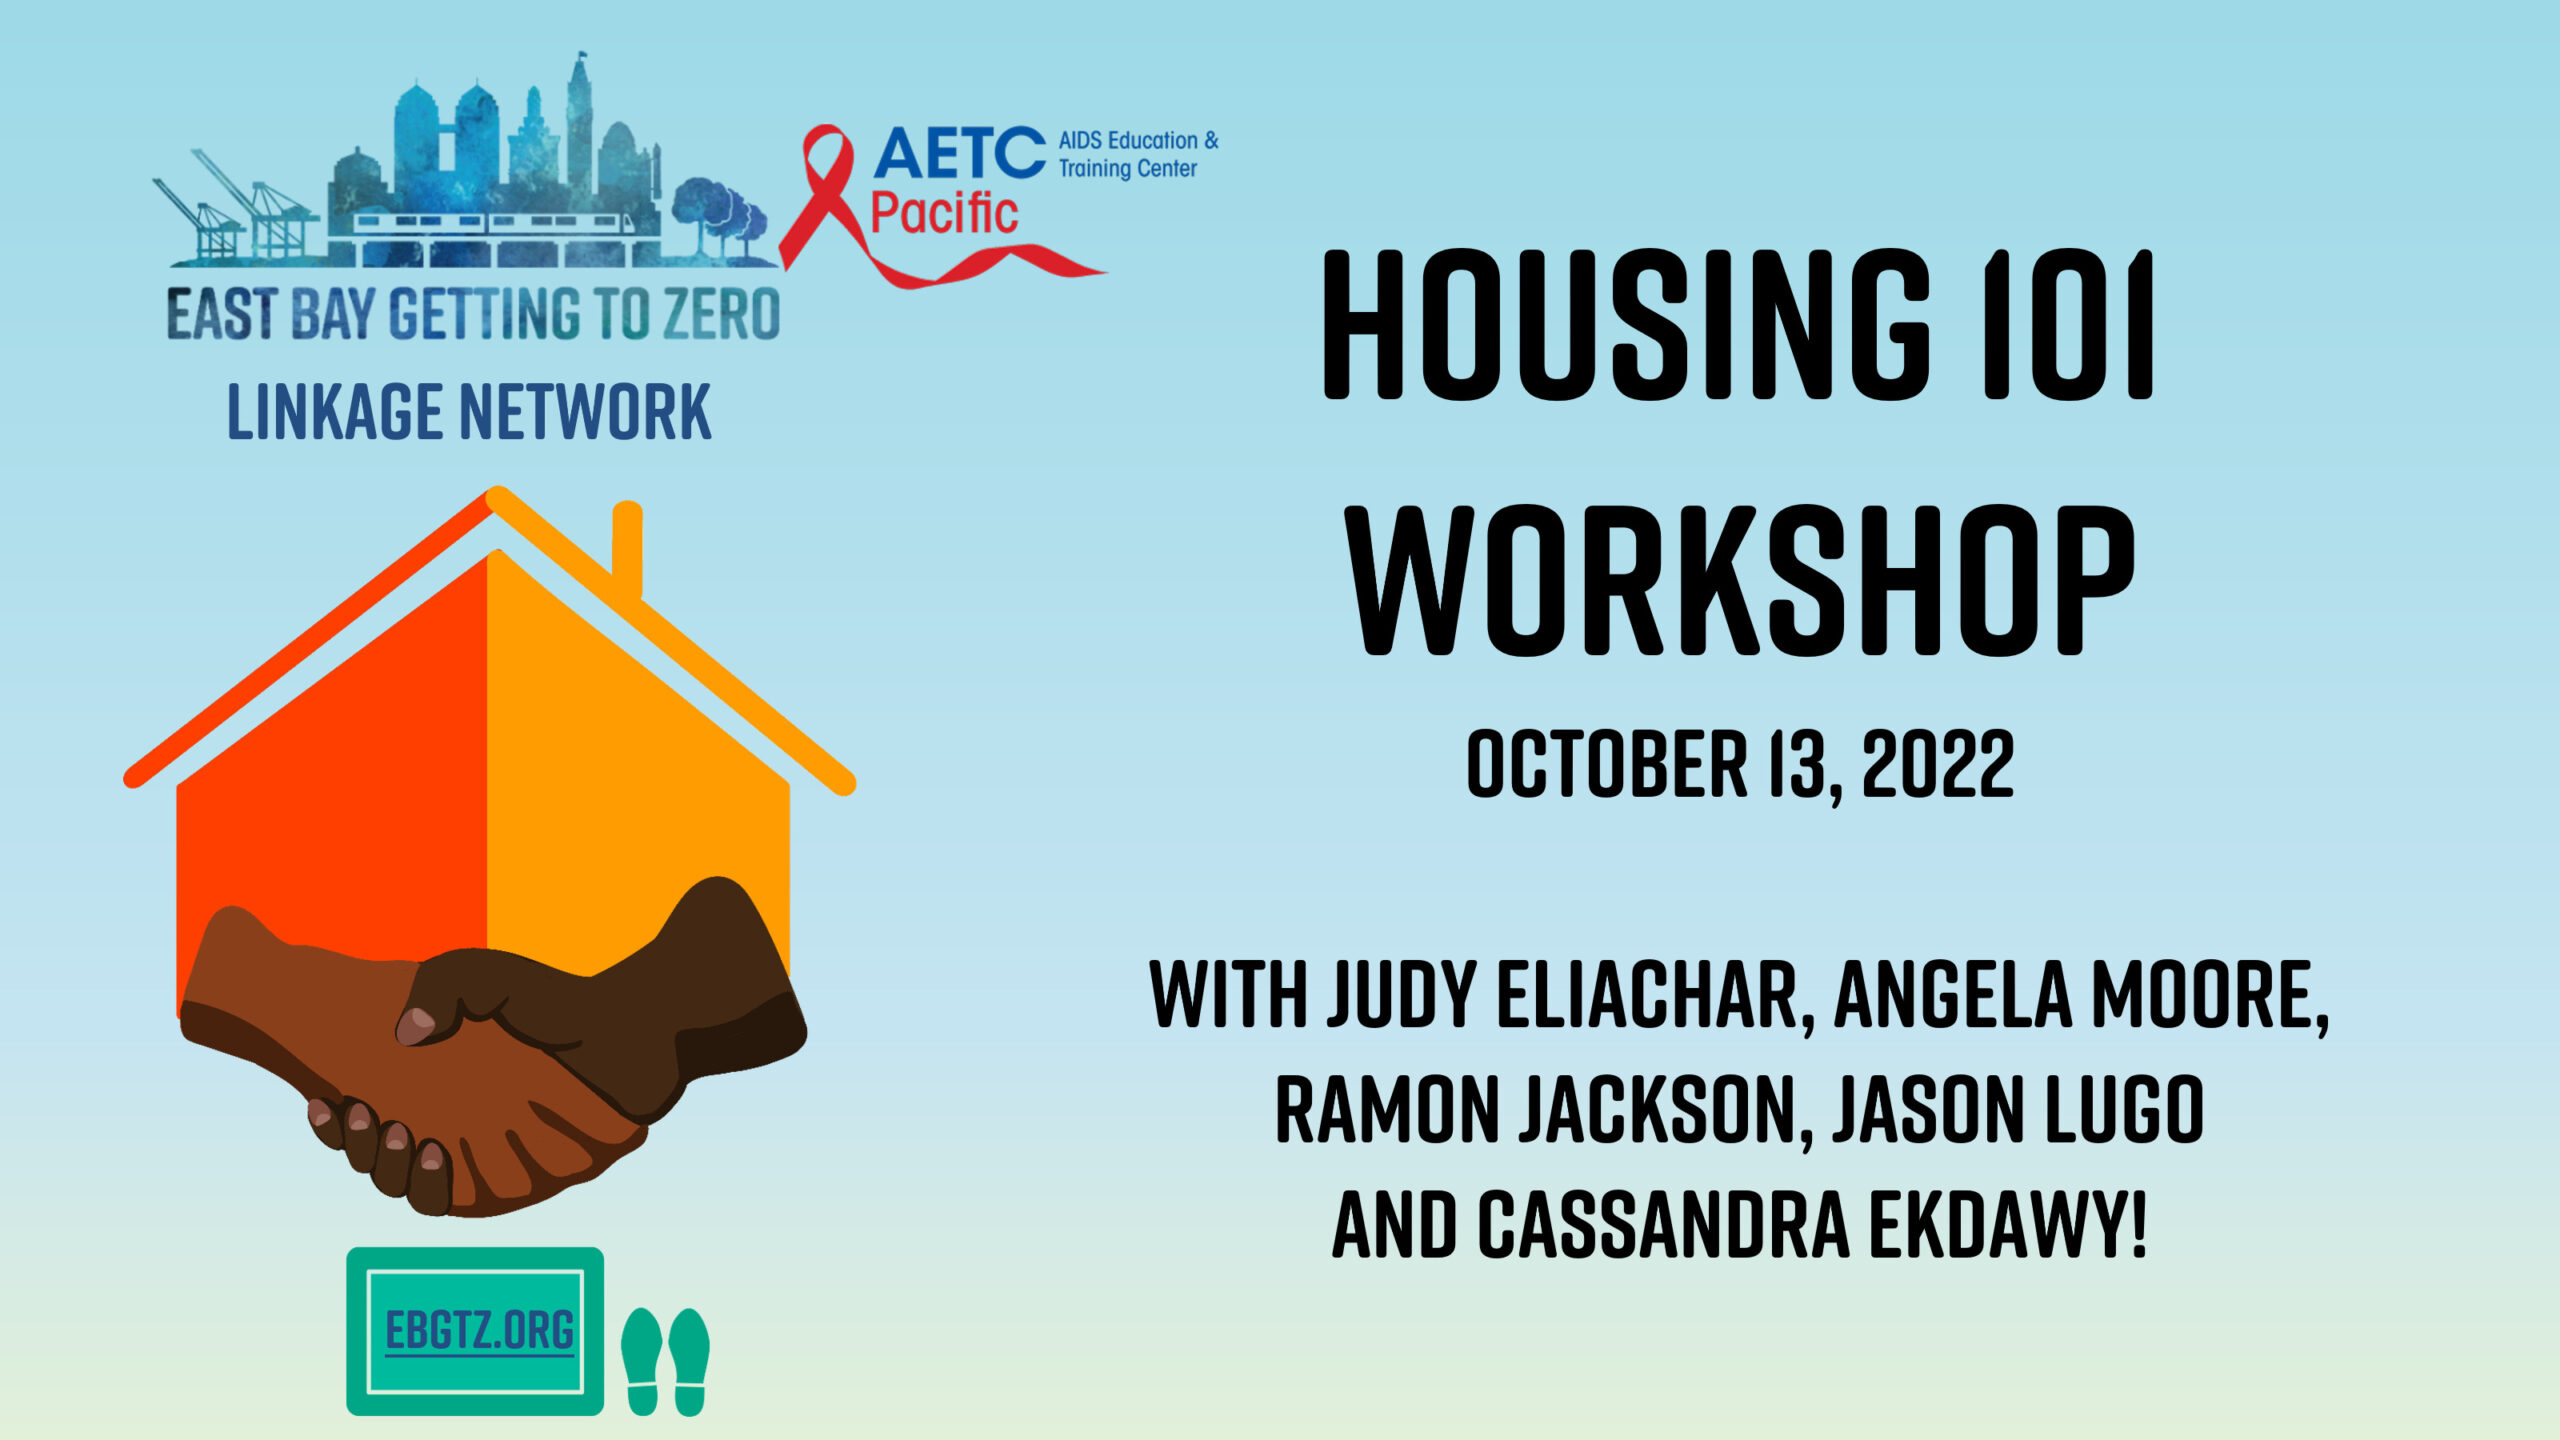 Graphic showing the October 13, 2022 Housing 101 workshop